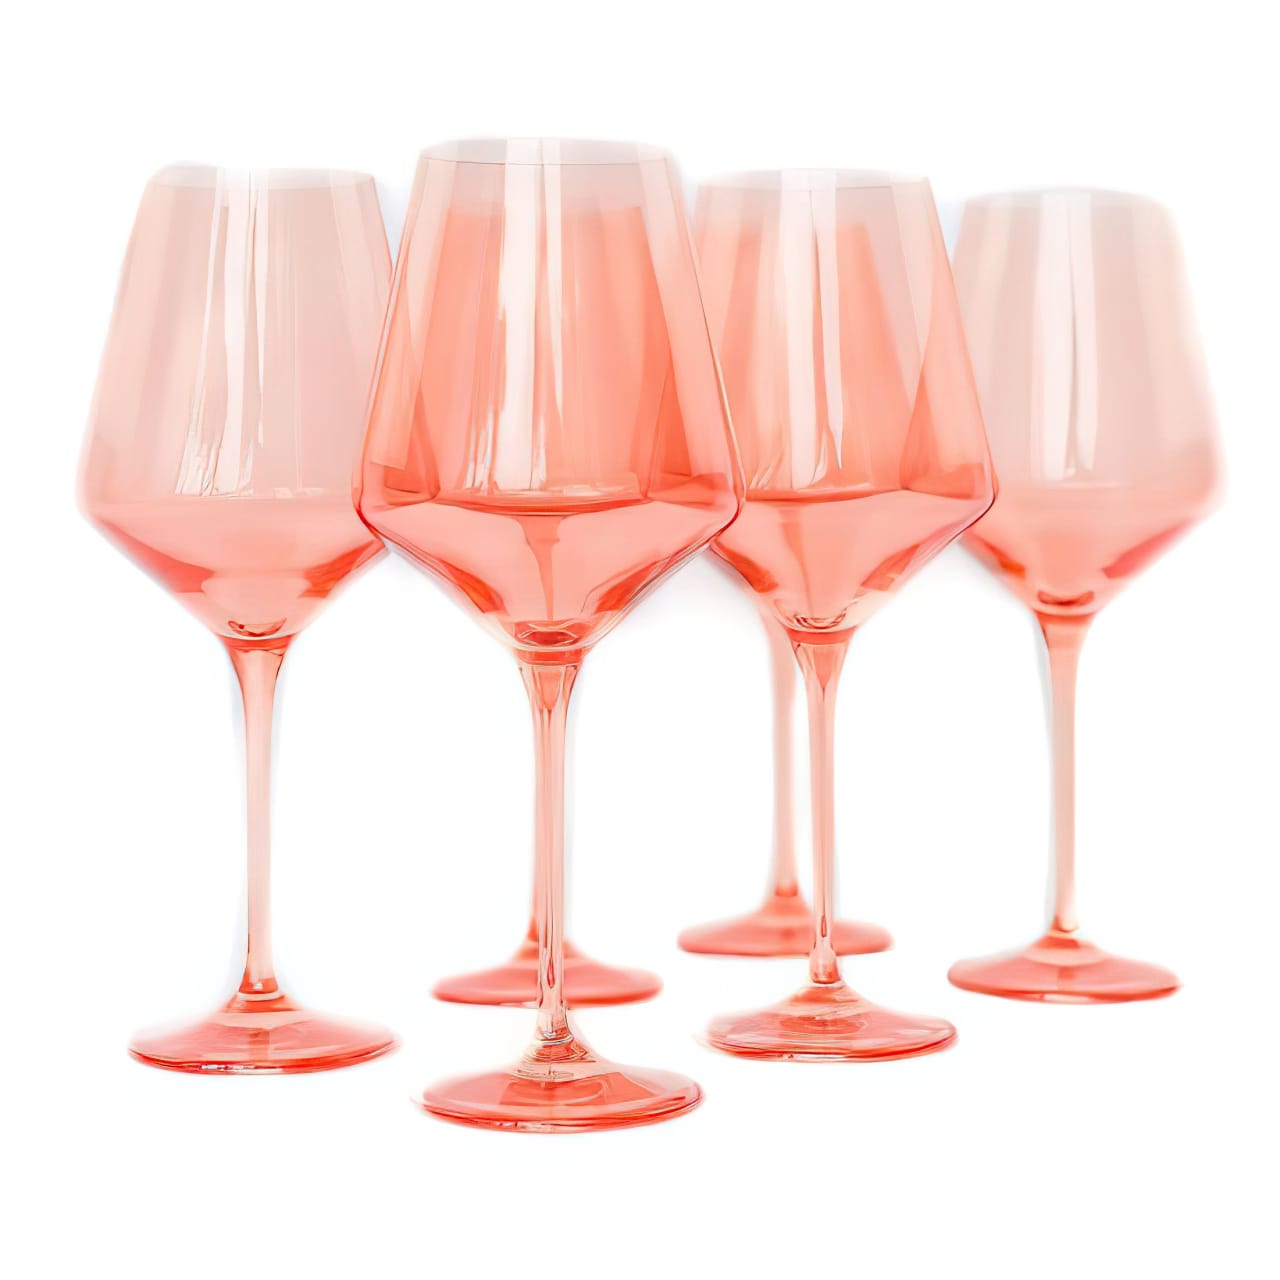 Shop for things you love 15 Unique Wine Glasses To Elevate Your Drinking  Experience, unique wine glasses 